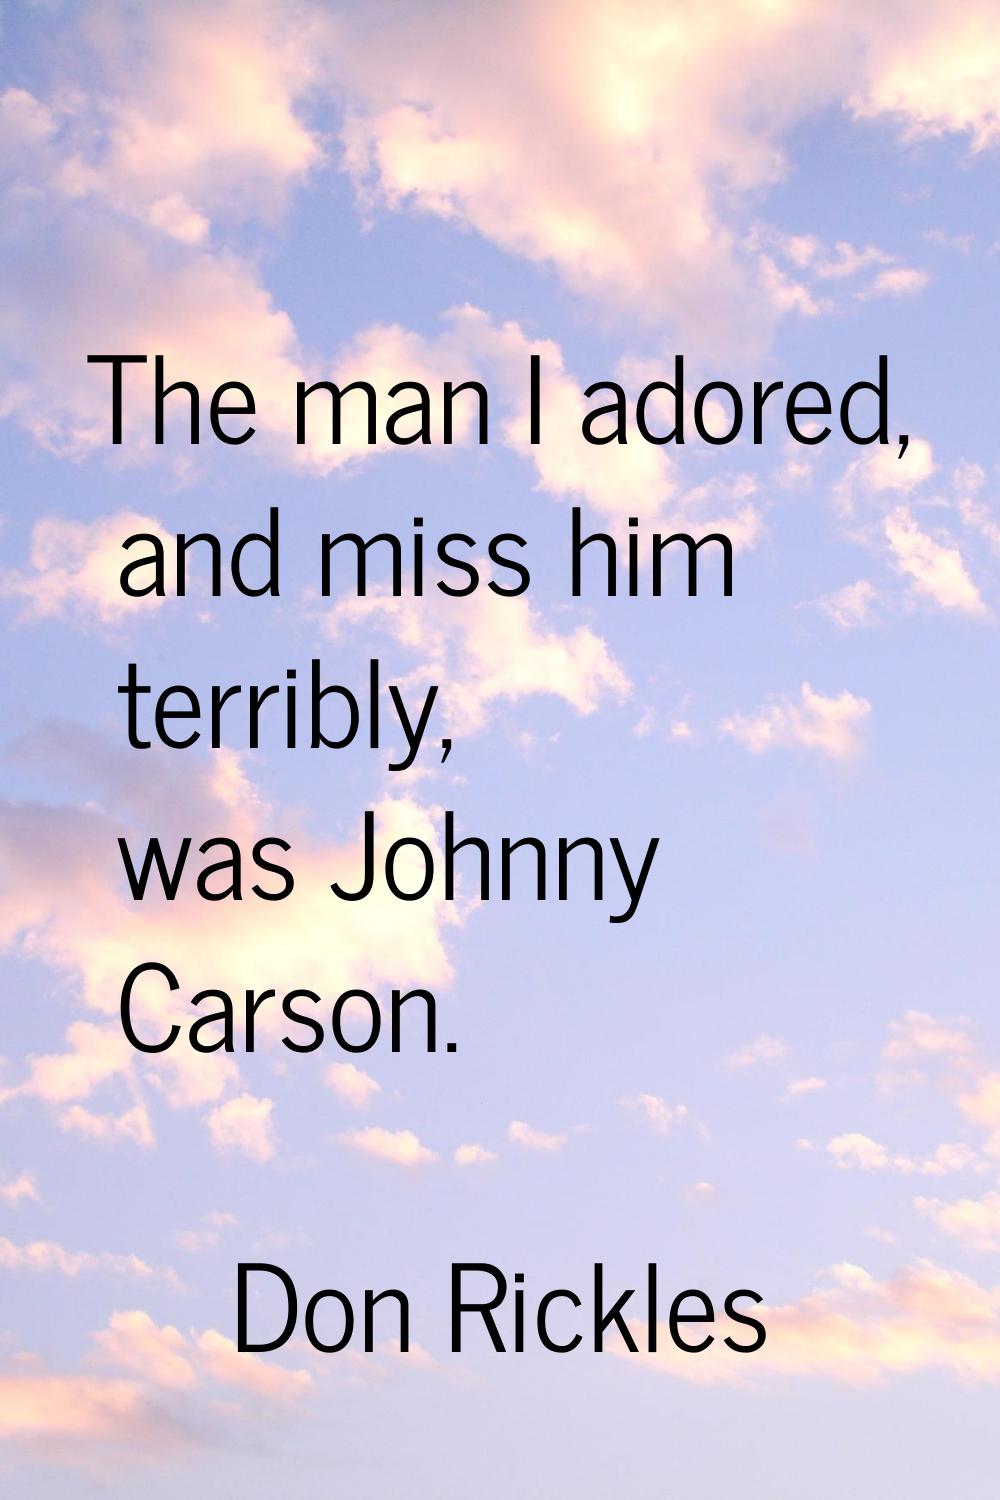 The man I adored, and miss him terribly, was Johnny Carson.